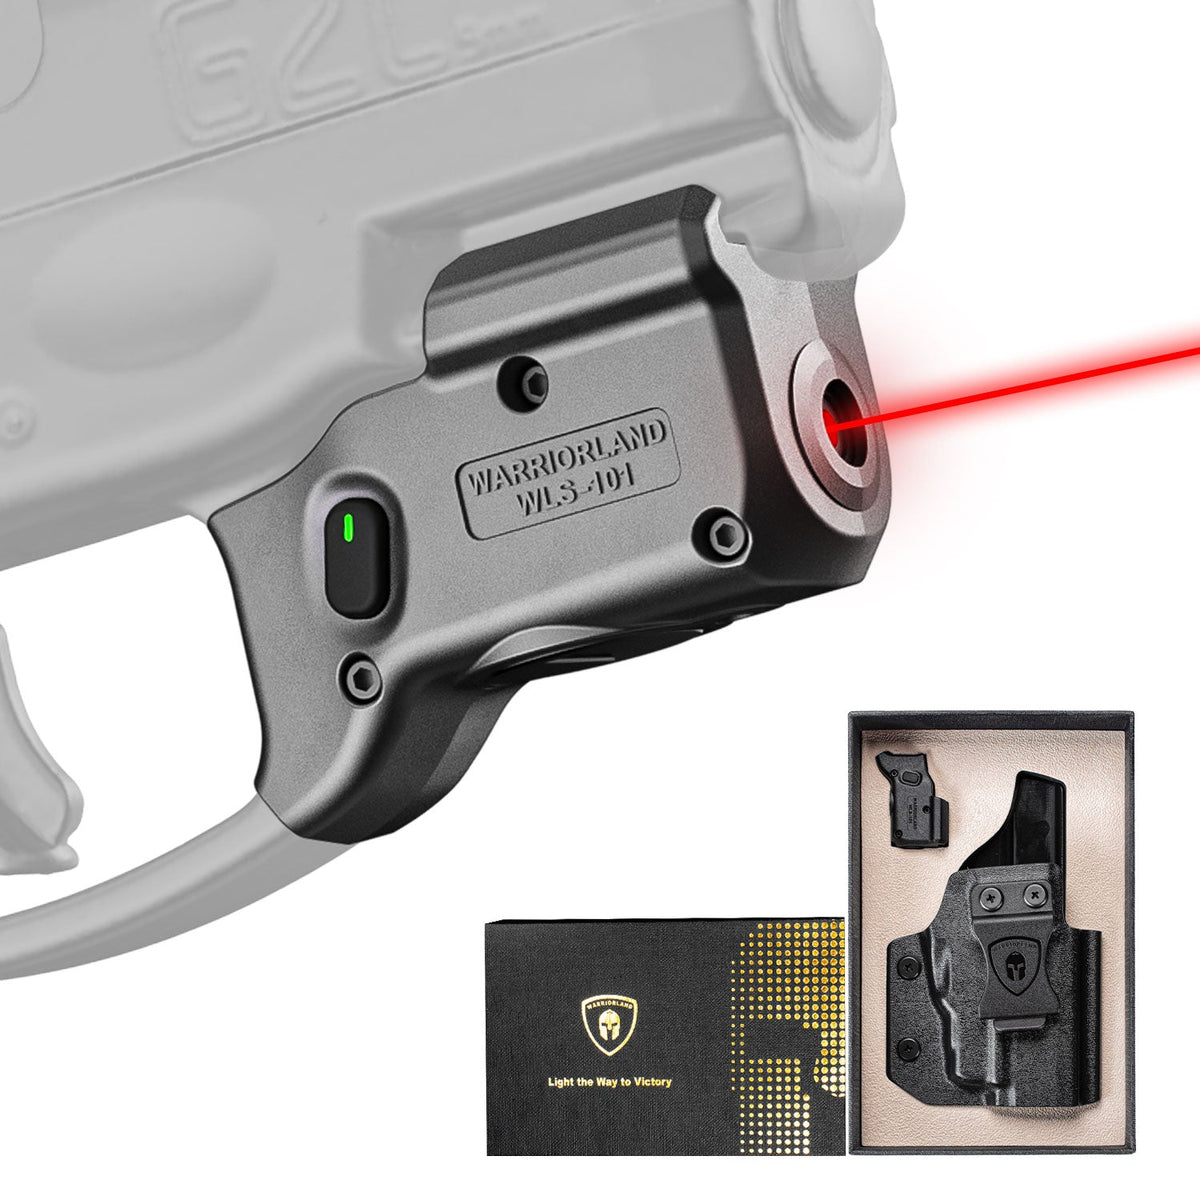 Red Laser Sight and Kydex Holster Combo Tailored Fit Taurus G2C/G3C/PT111 Millennium G2/PT140, Ultra Compact G2C Beam Sight, Gun Sight with Ambidextrous On/Off Switch & Power Indicator|WARRIORLAND